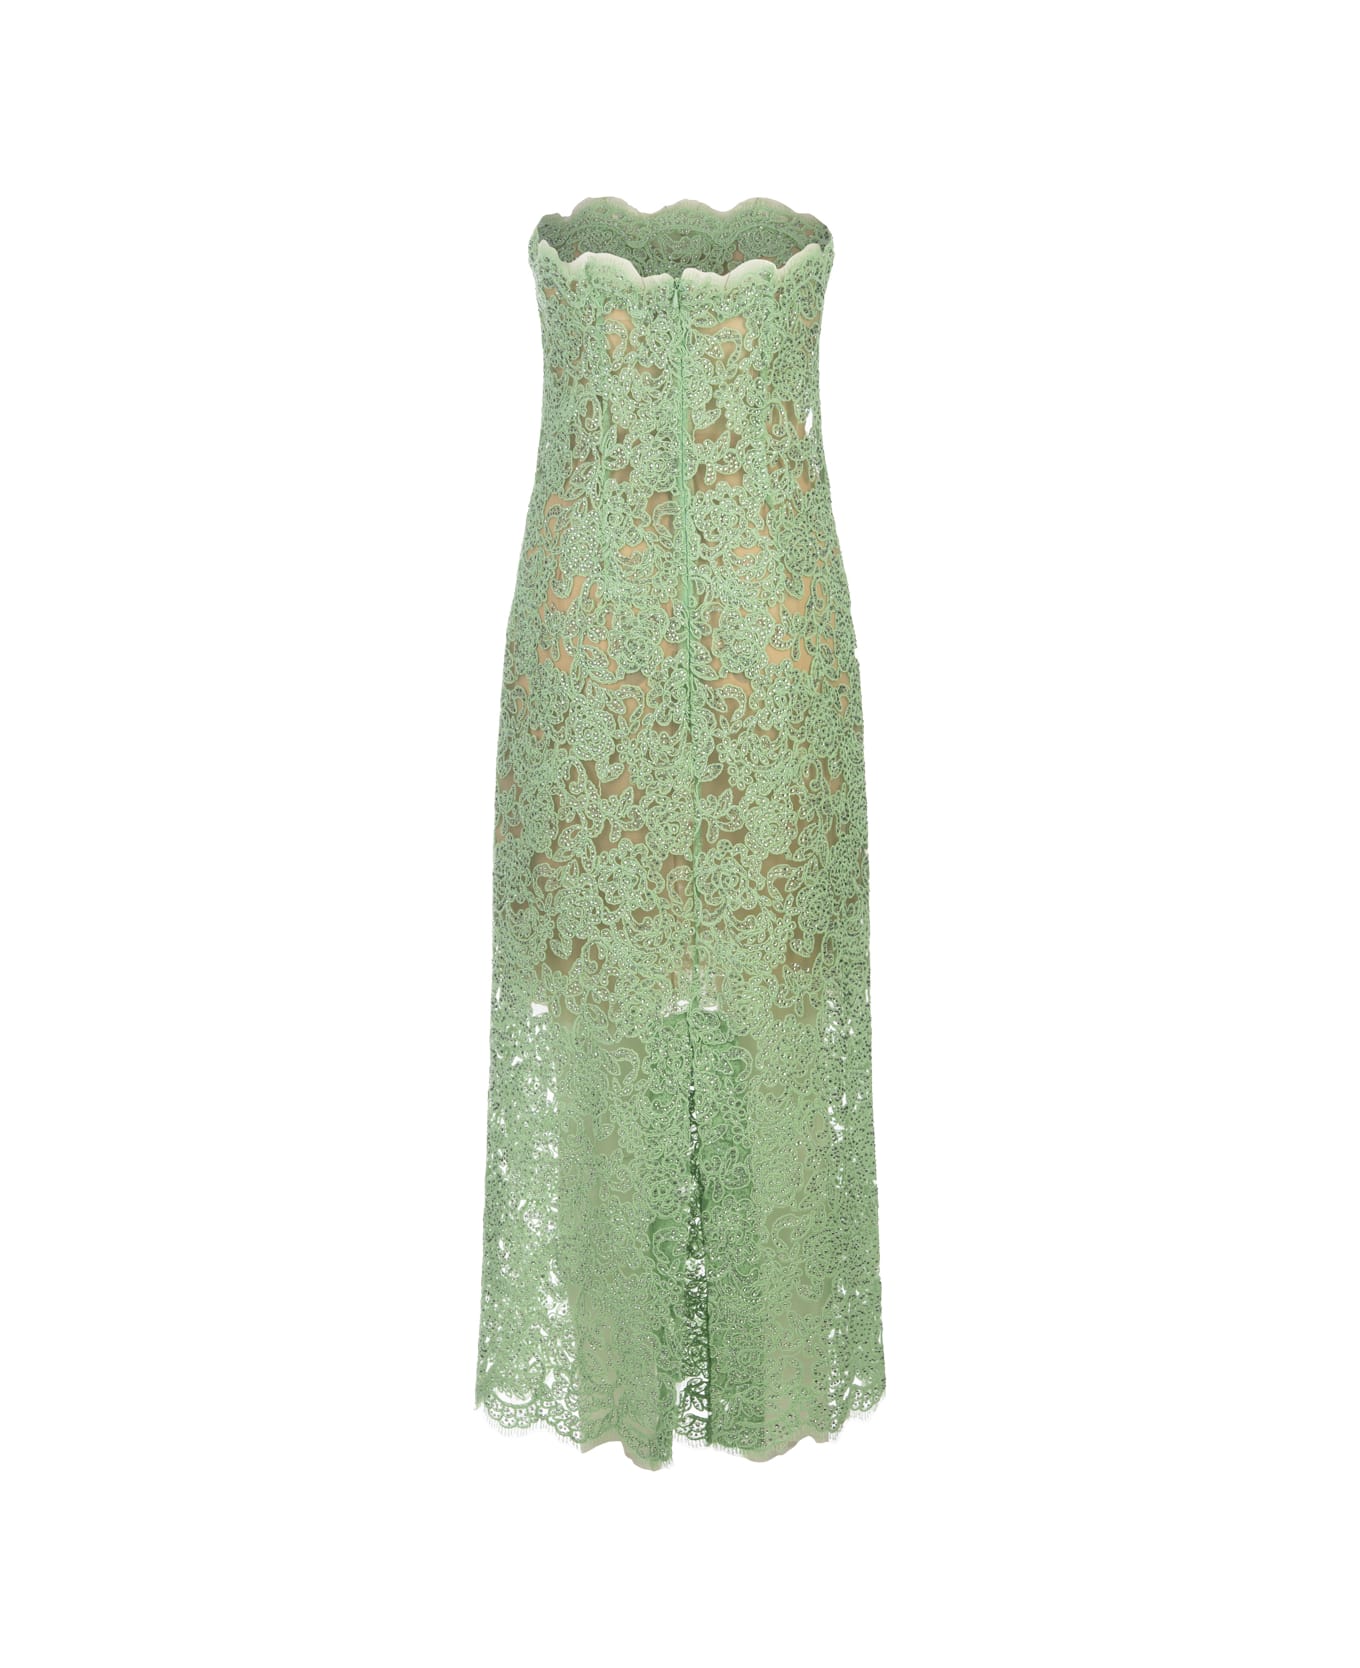 Ermanno Scervino Green Lace Longuette Dress With Micro Crystals - Green